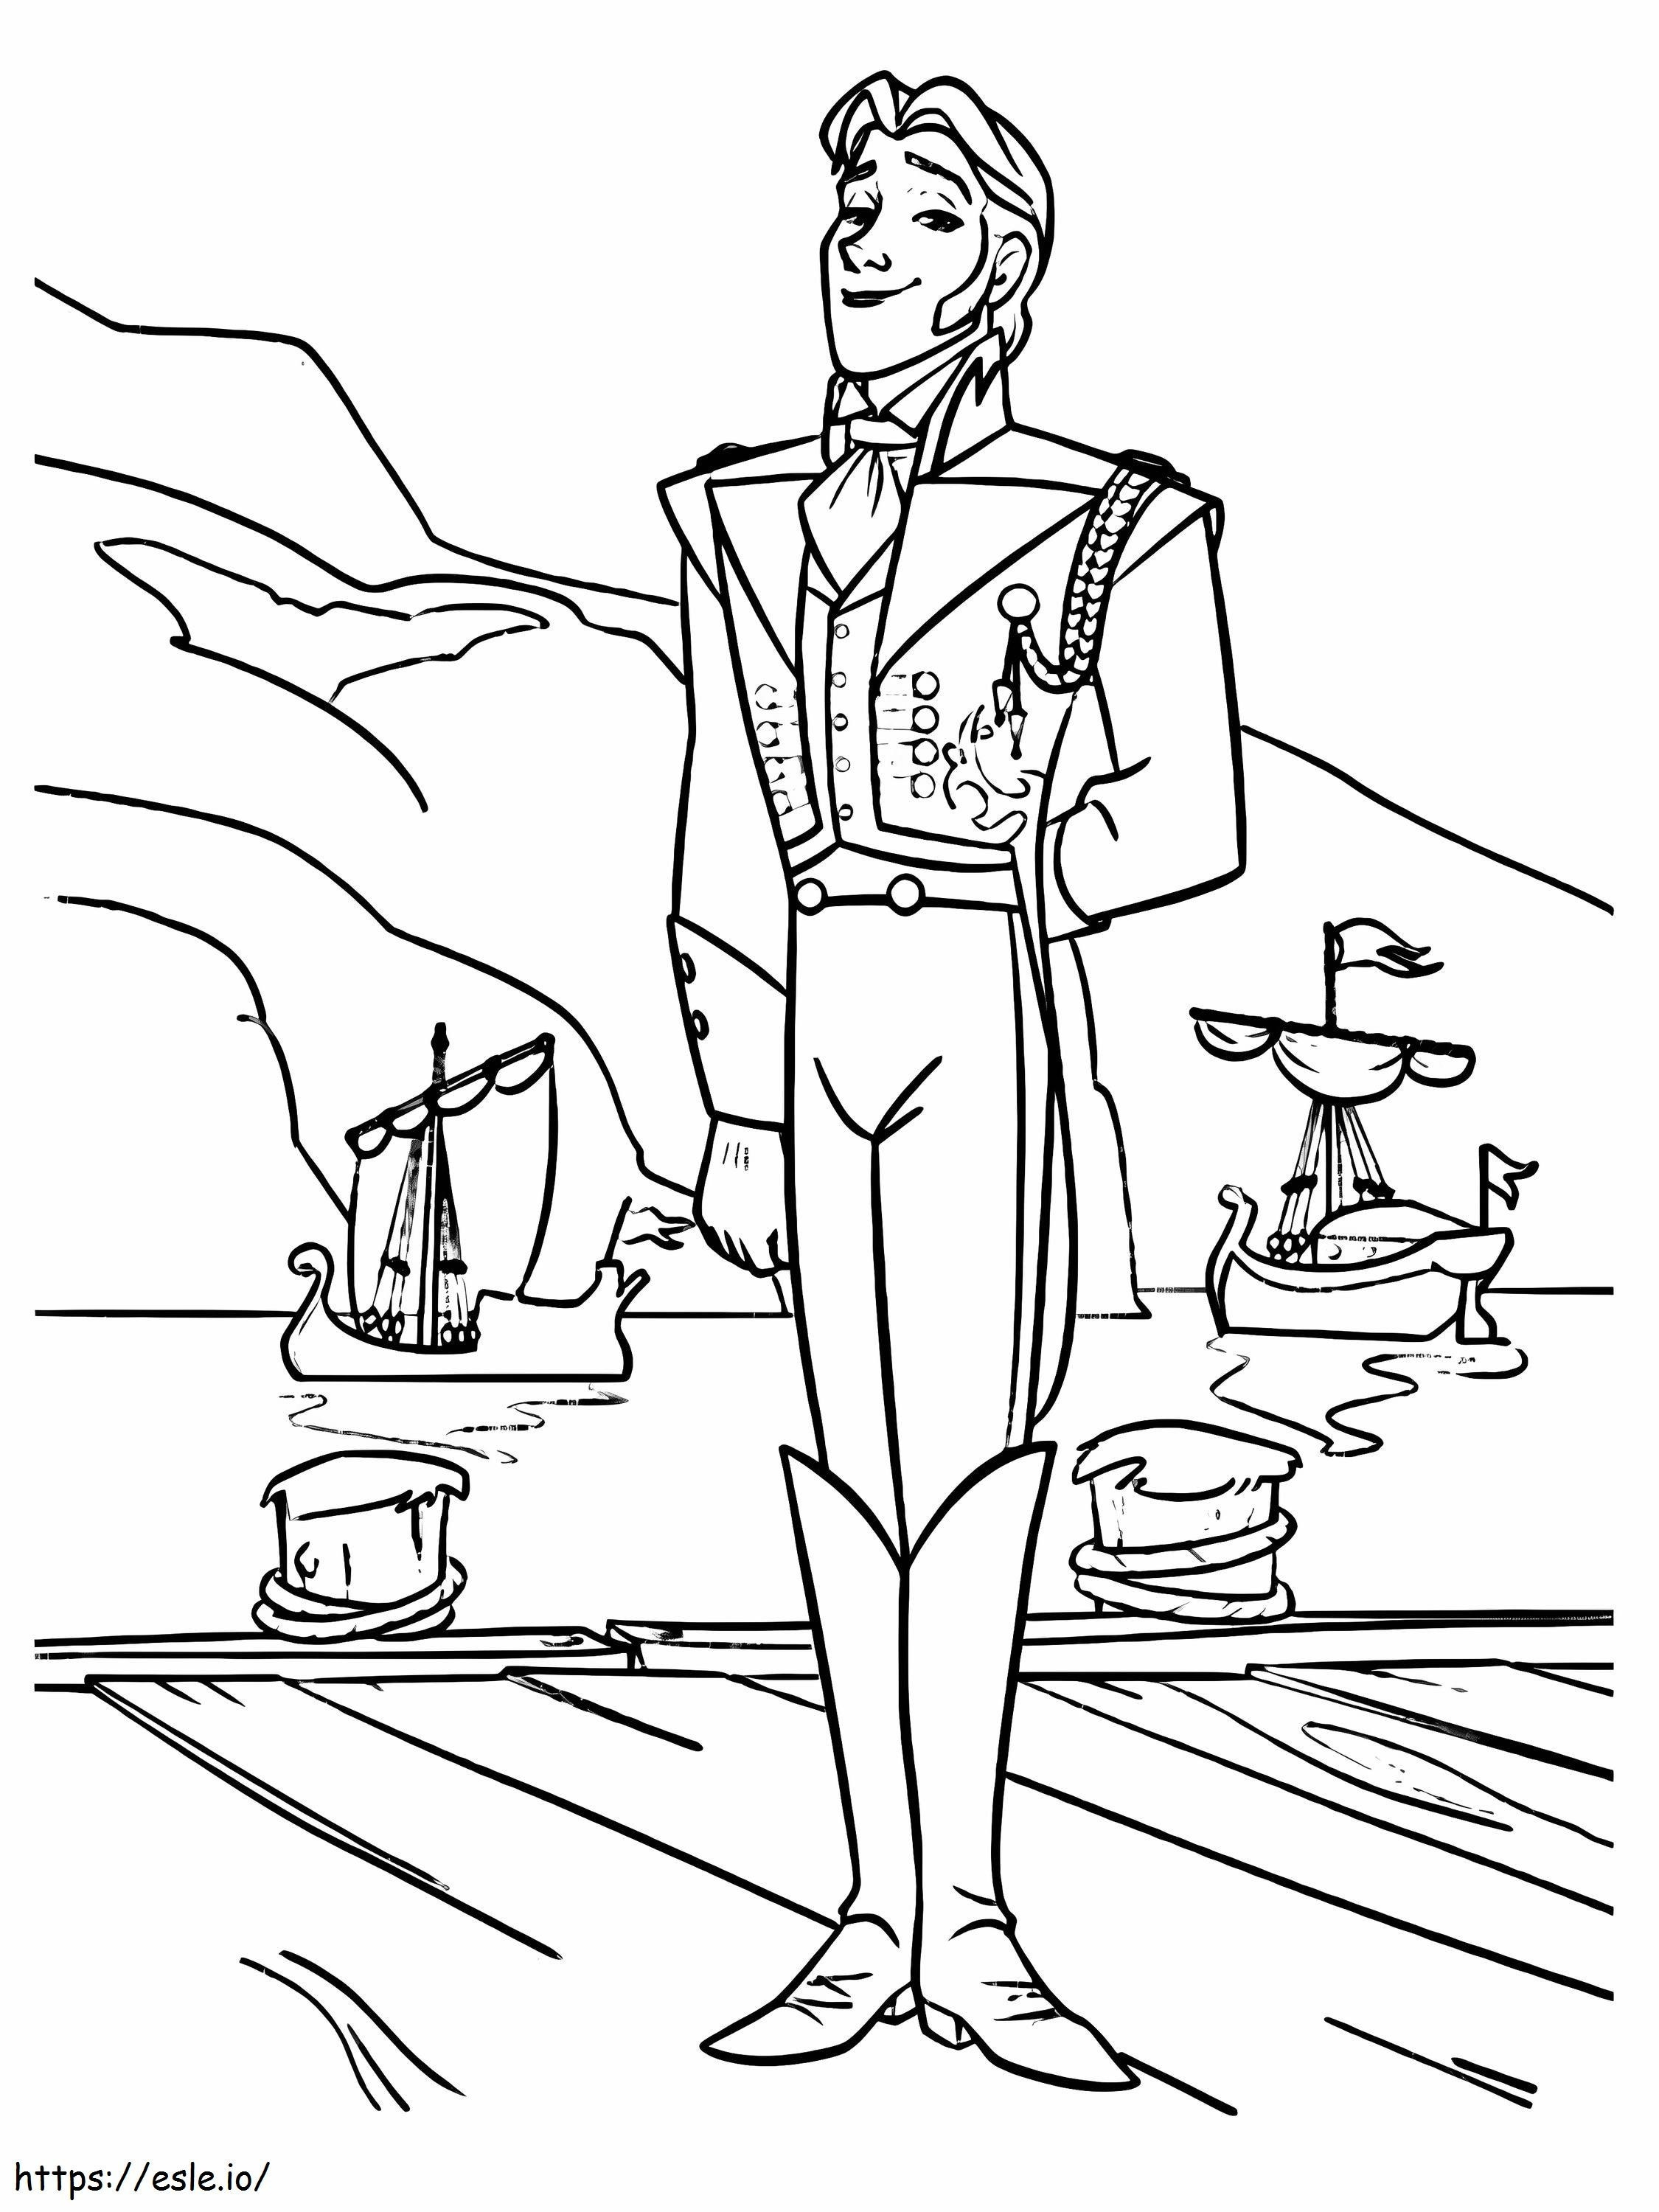 Prince Hans From Frozen coloring page